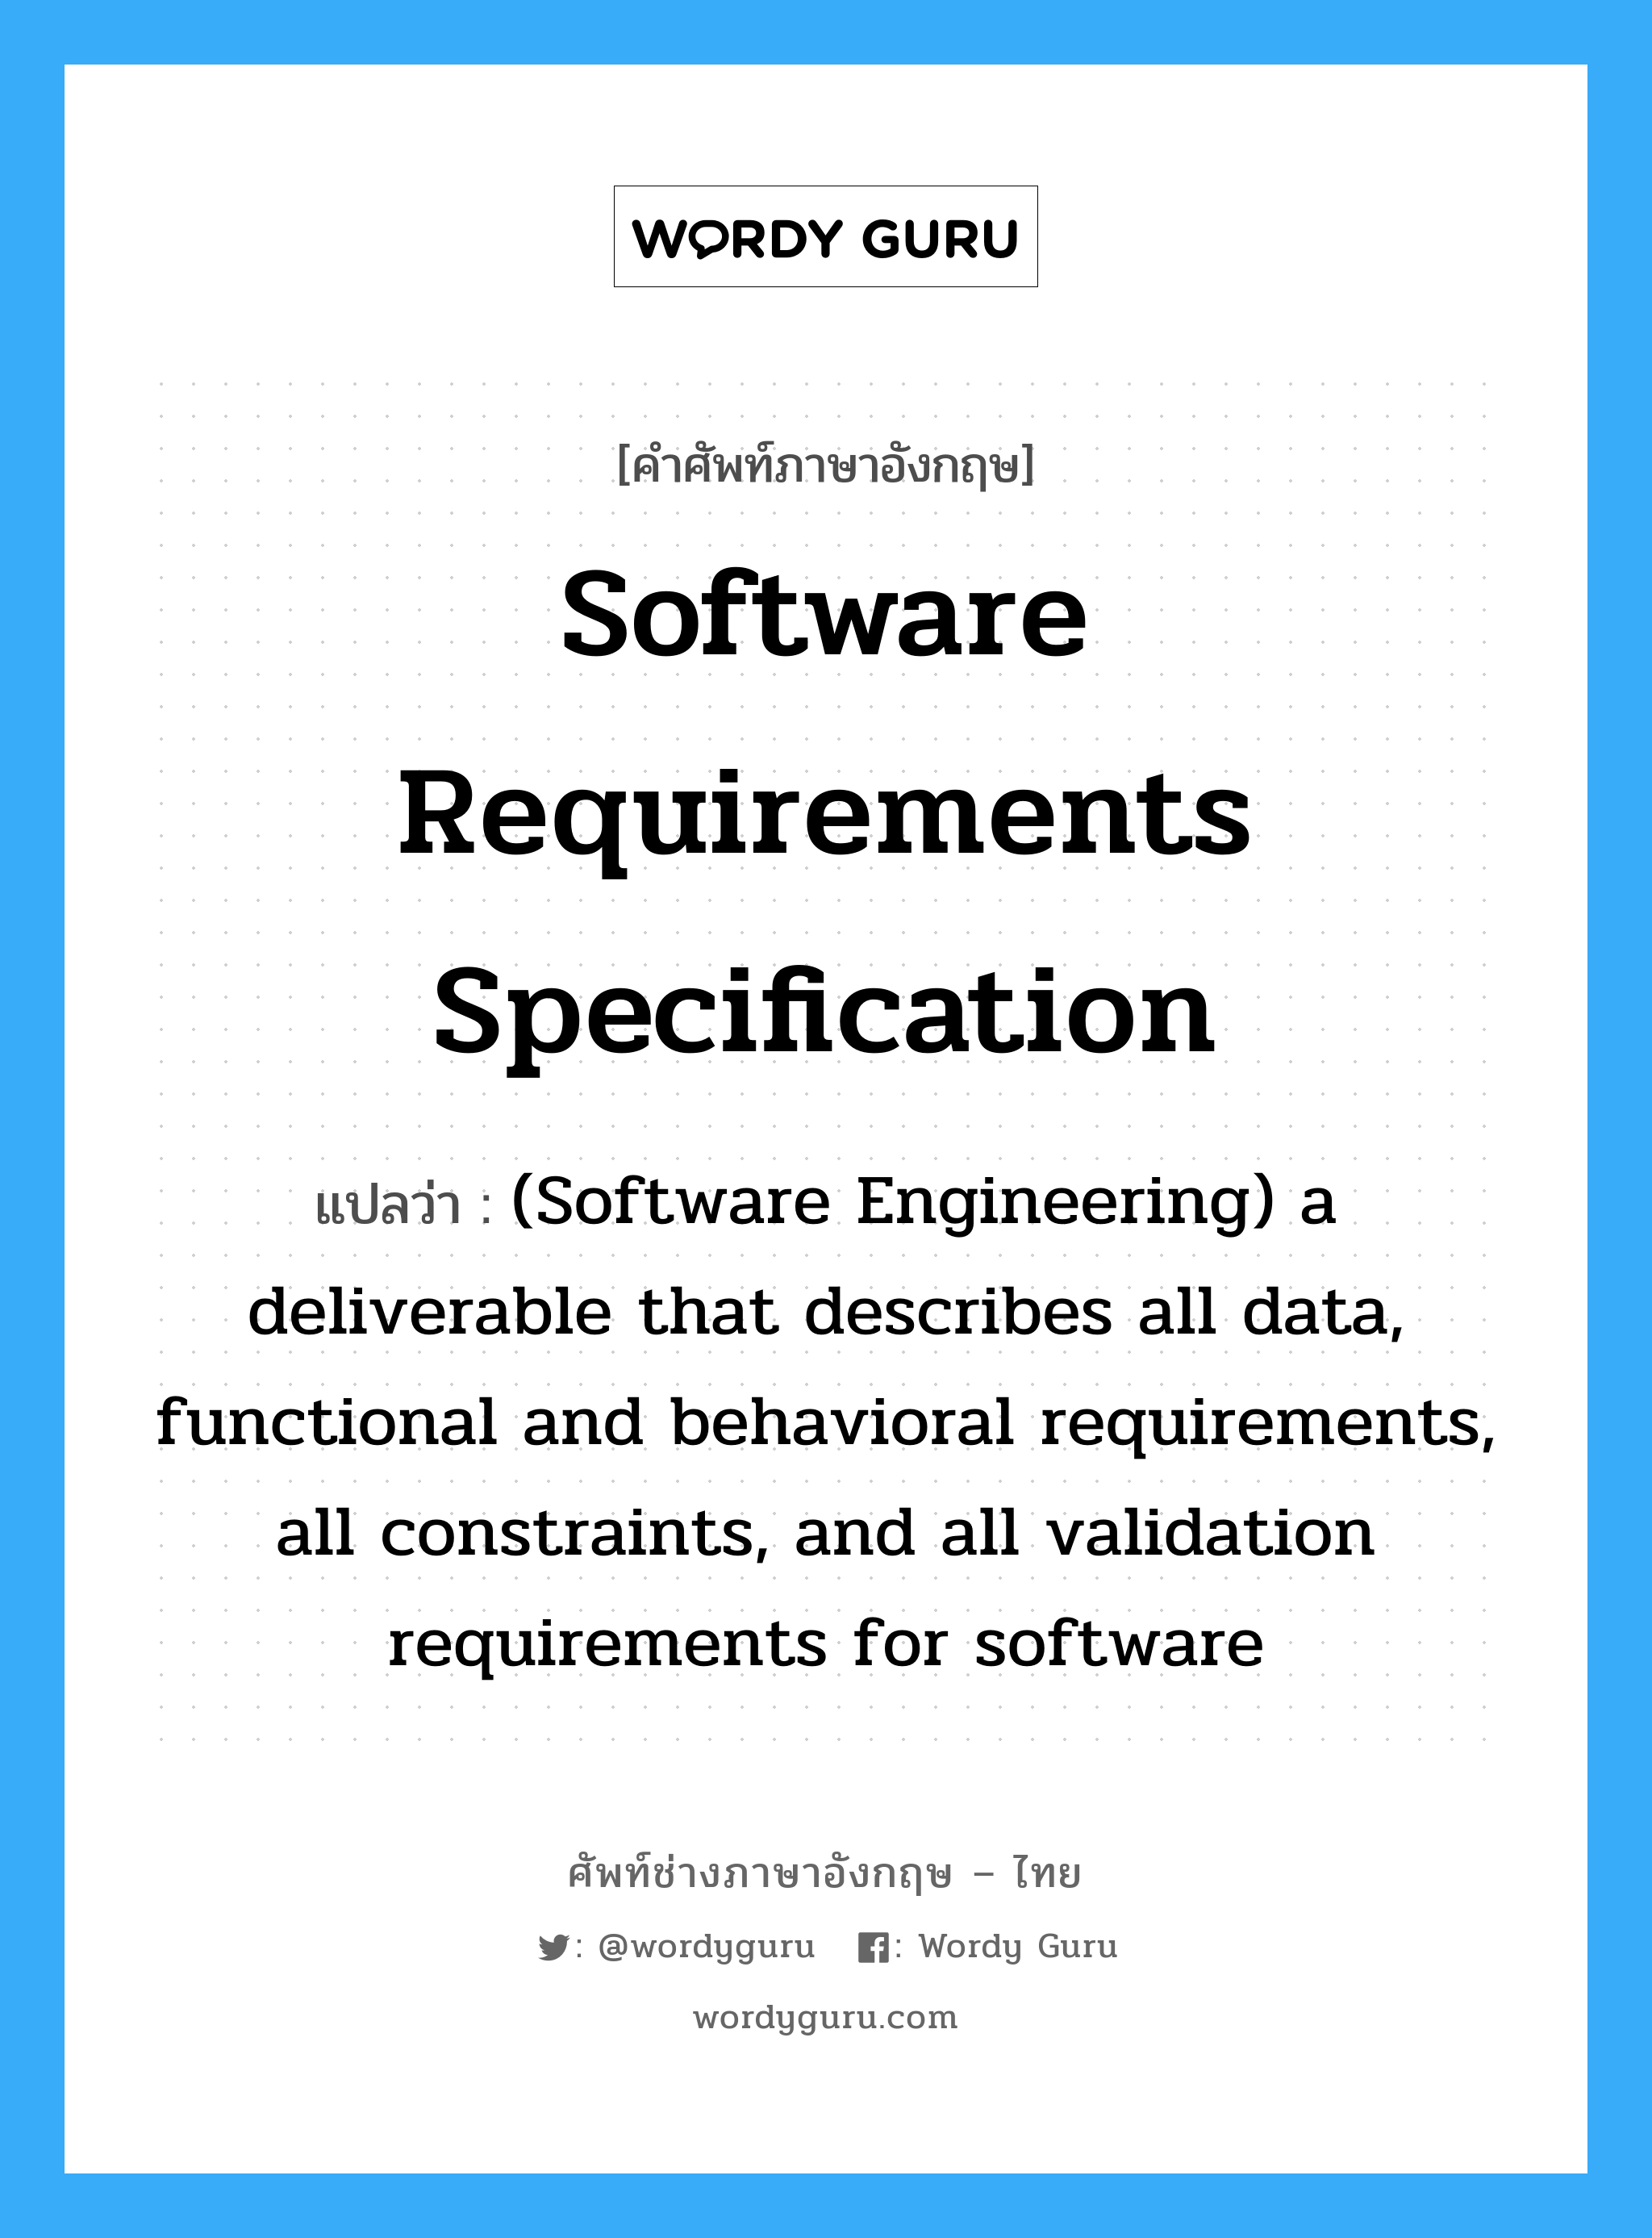 Software Requirements Specification แปลว่า?, คำศัพท์ช่างภาษาอังกฤษ - ไทย Software Requirements Specification คำศัพท์ภาษาอังกฤษ Software Requirements Specification แปลว่า (Software Engineering) a deliverable that describes all data, functional and behavioral requirements, all constraints, and all validation requirements for software